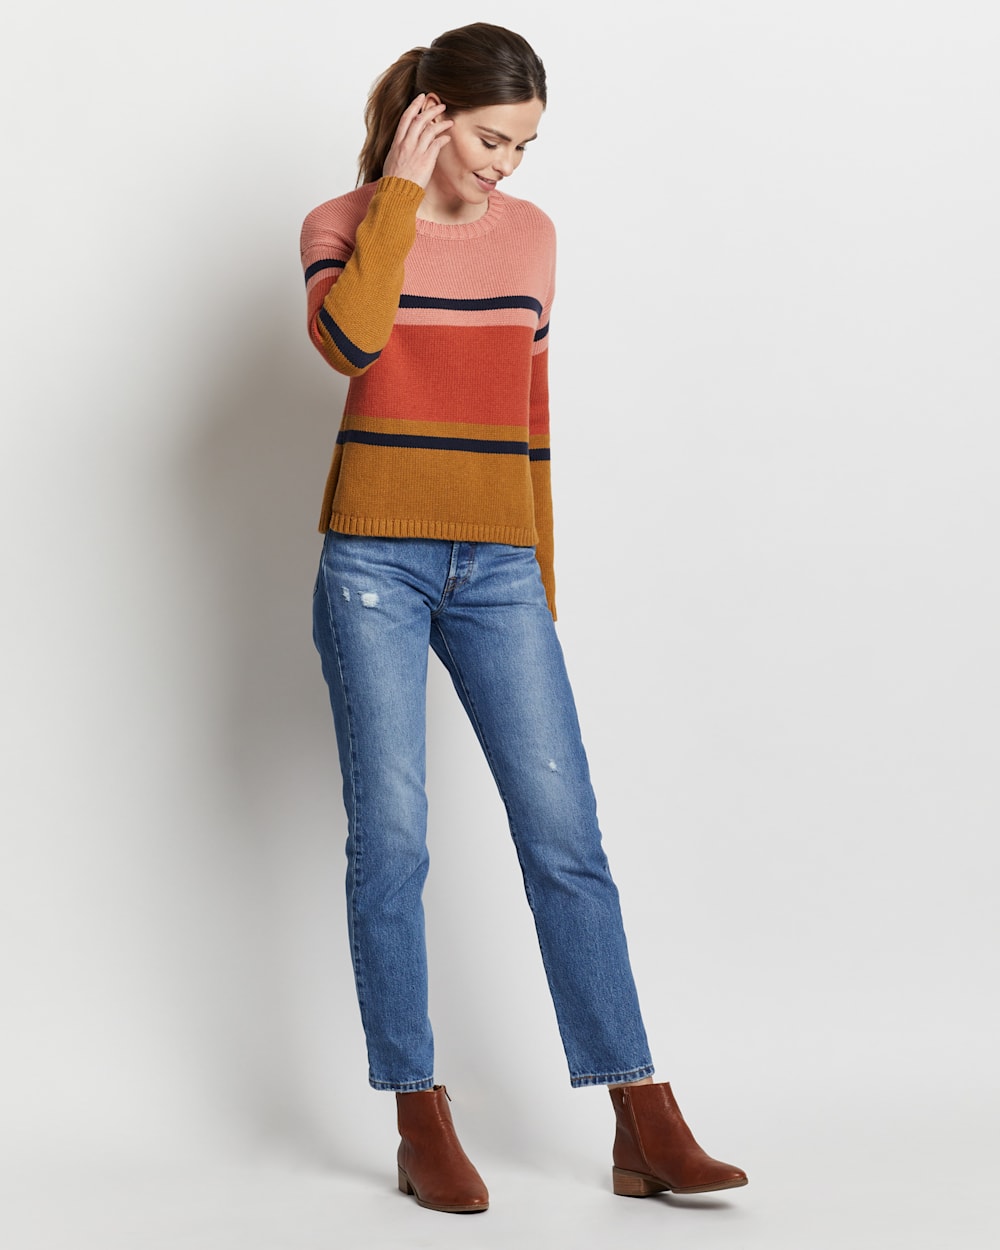 WOMEN'S RELAXED-FIT STRIPE PULLOVER IN PEANUT/CORAL MULTI image number 1